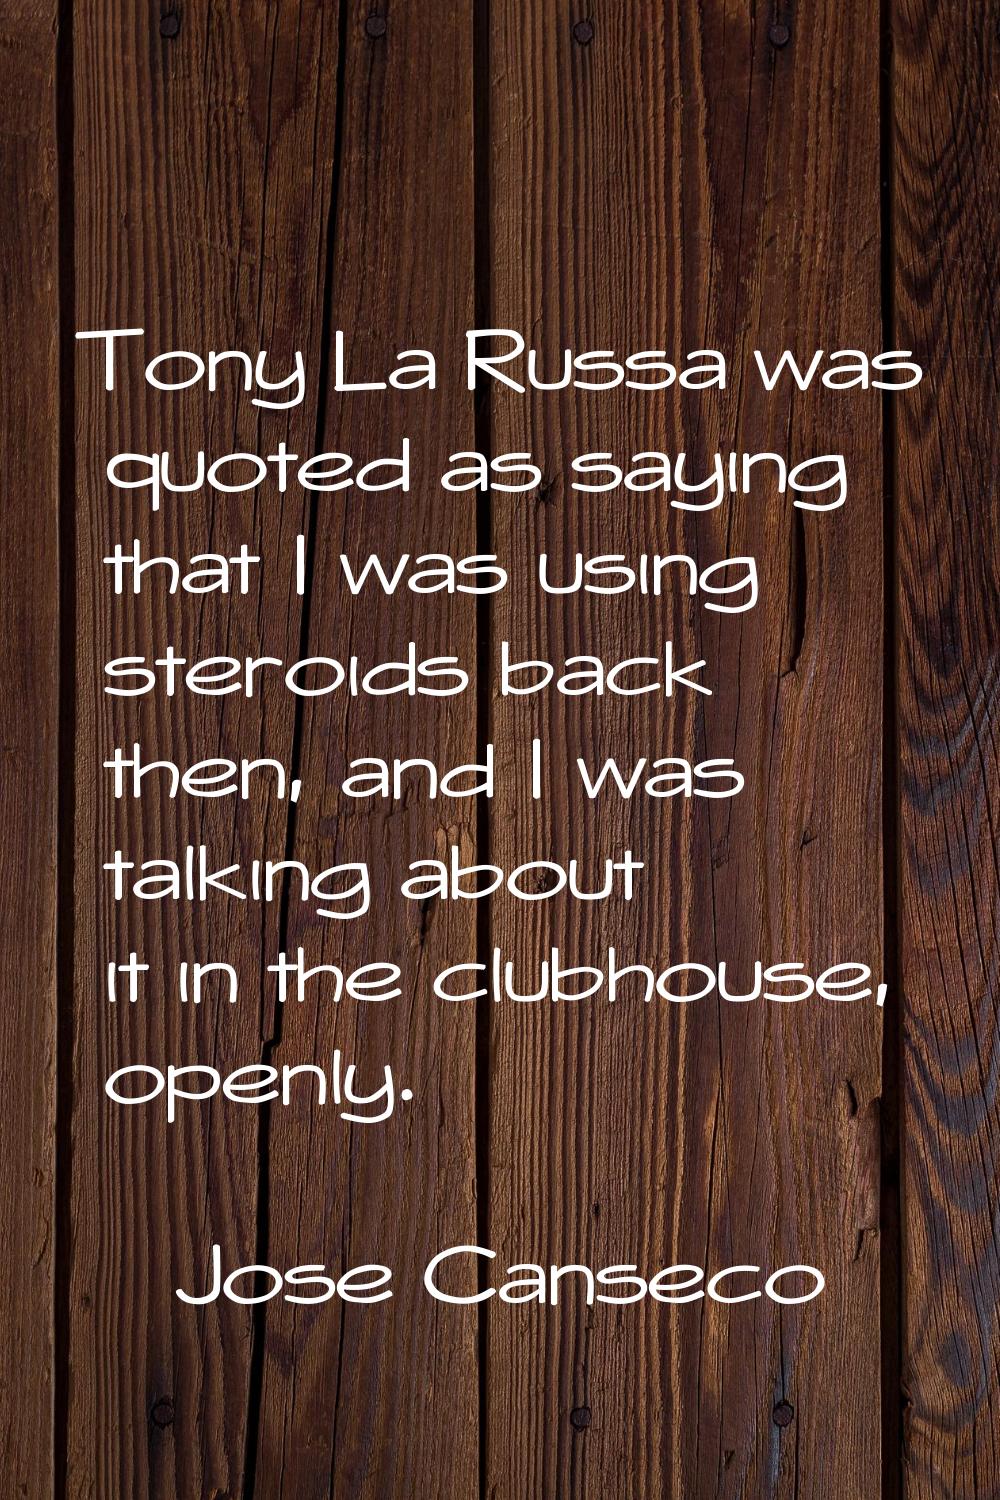 Tony La Russa was quoted as saying that I was using steroids back then, and I was talking about it 